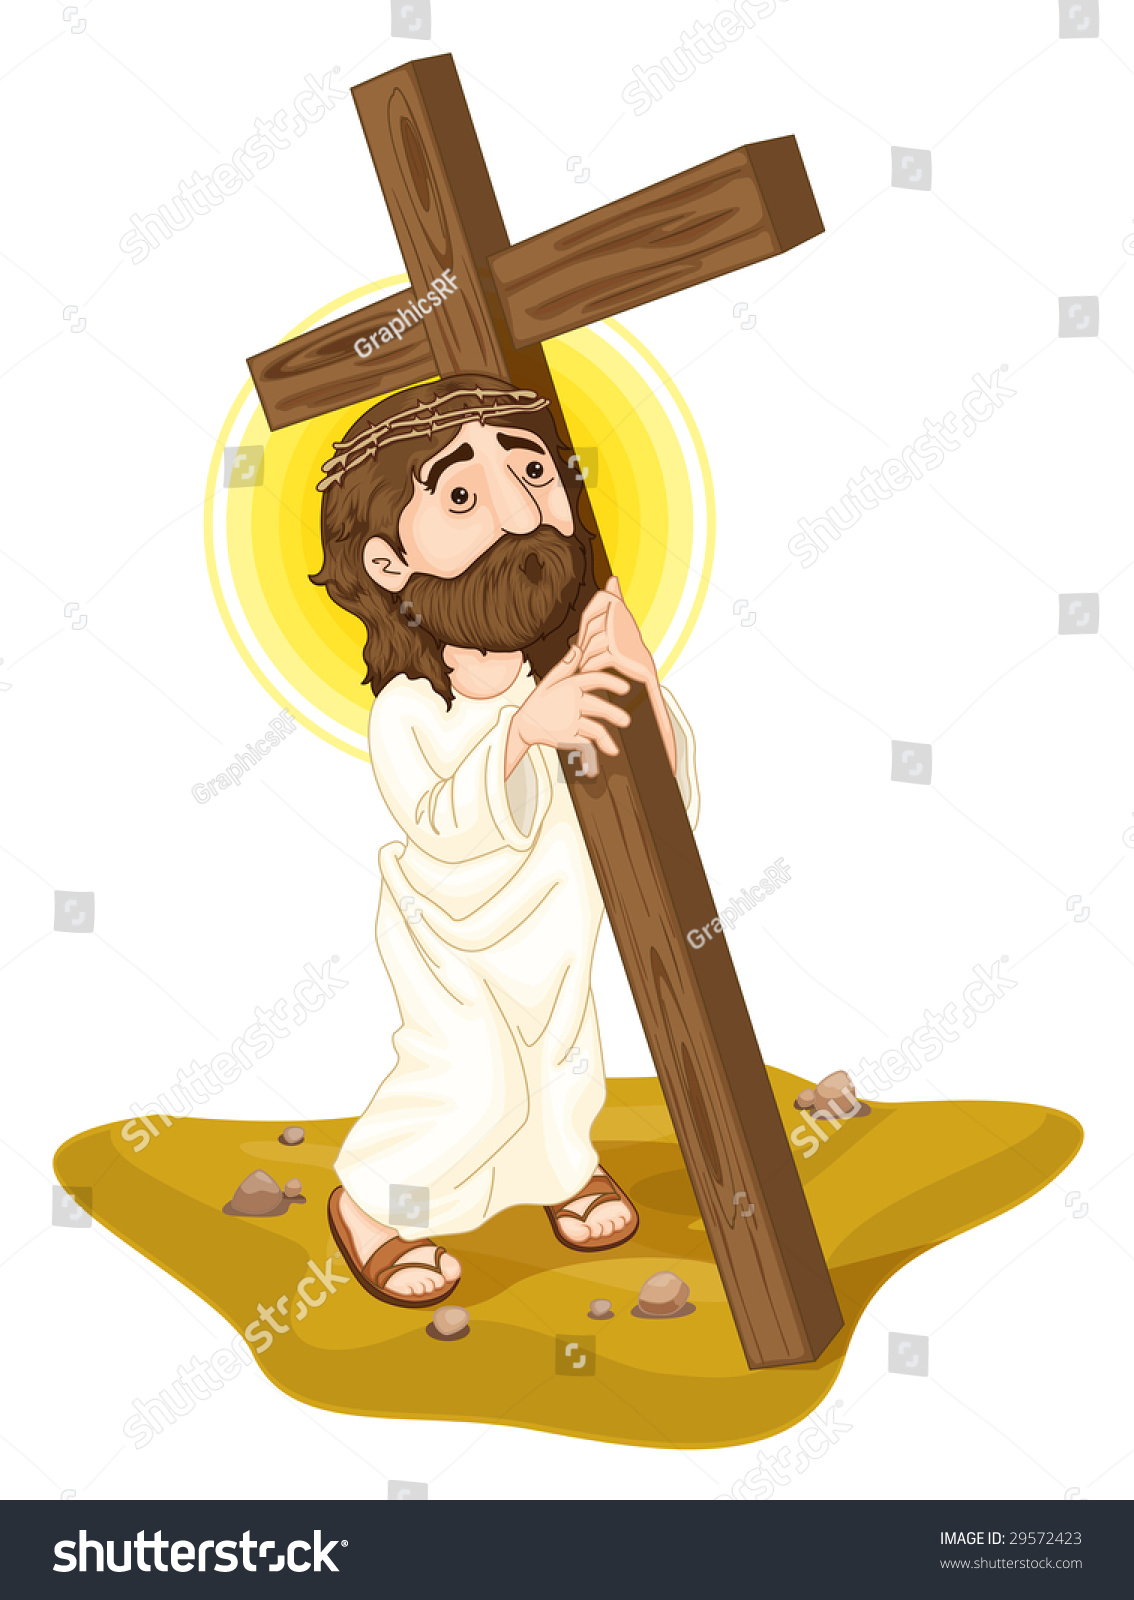 clipart jesus carrying cross - photo #23